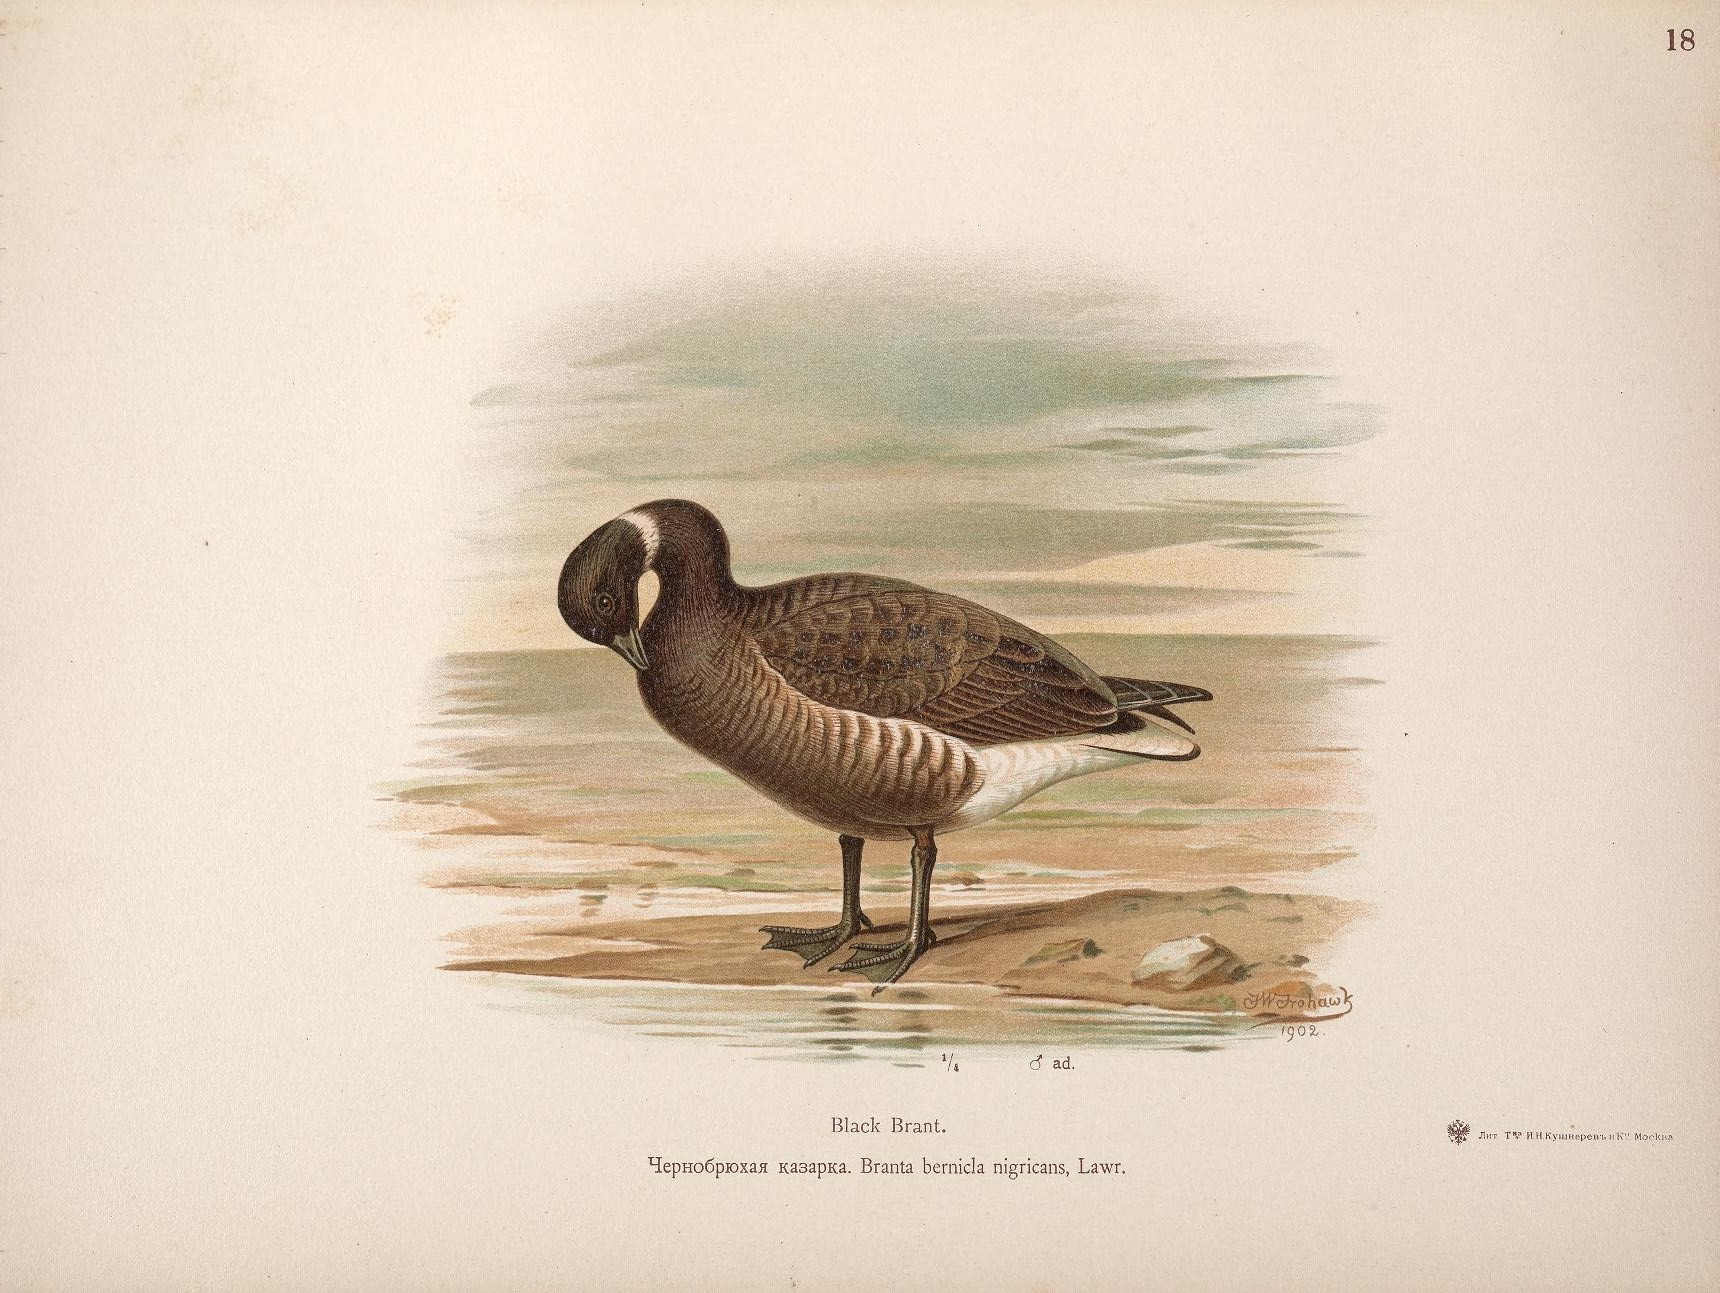 an antique print shows an image of a duck in water